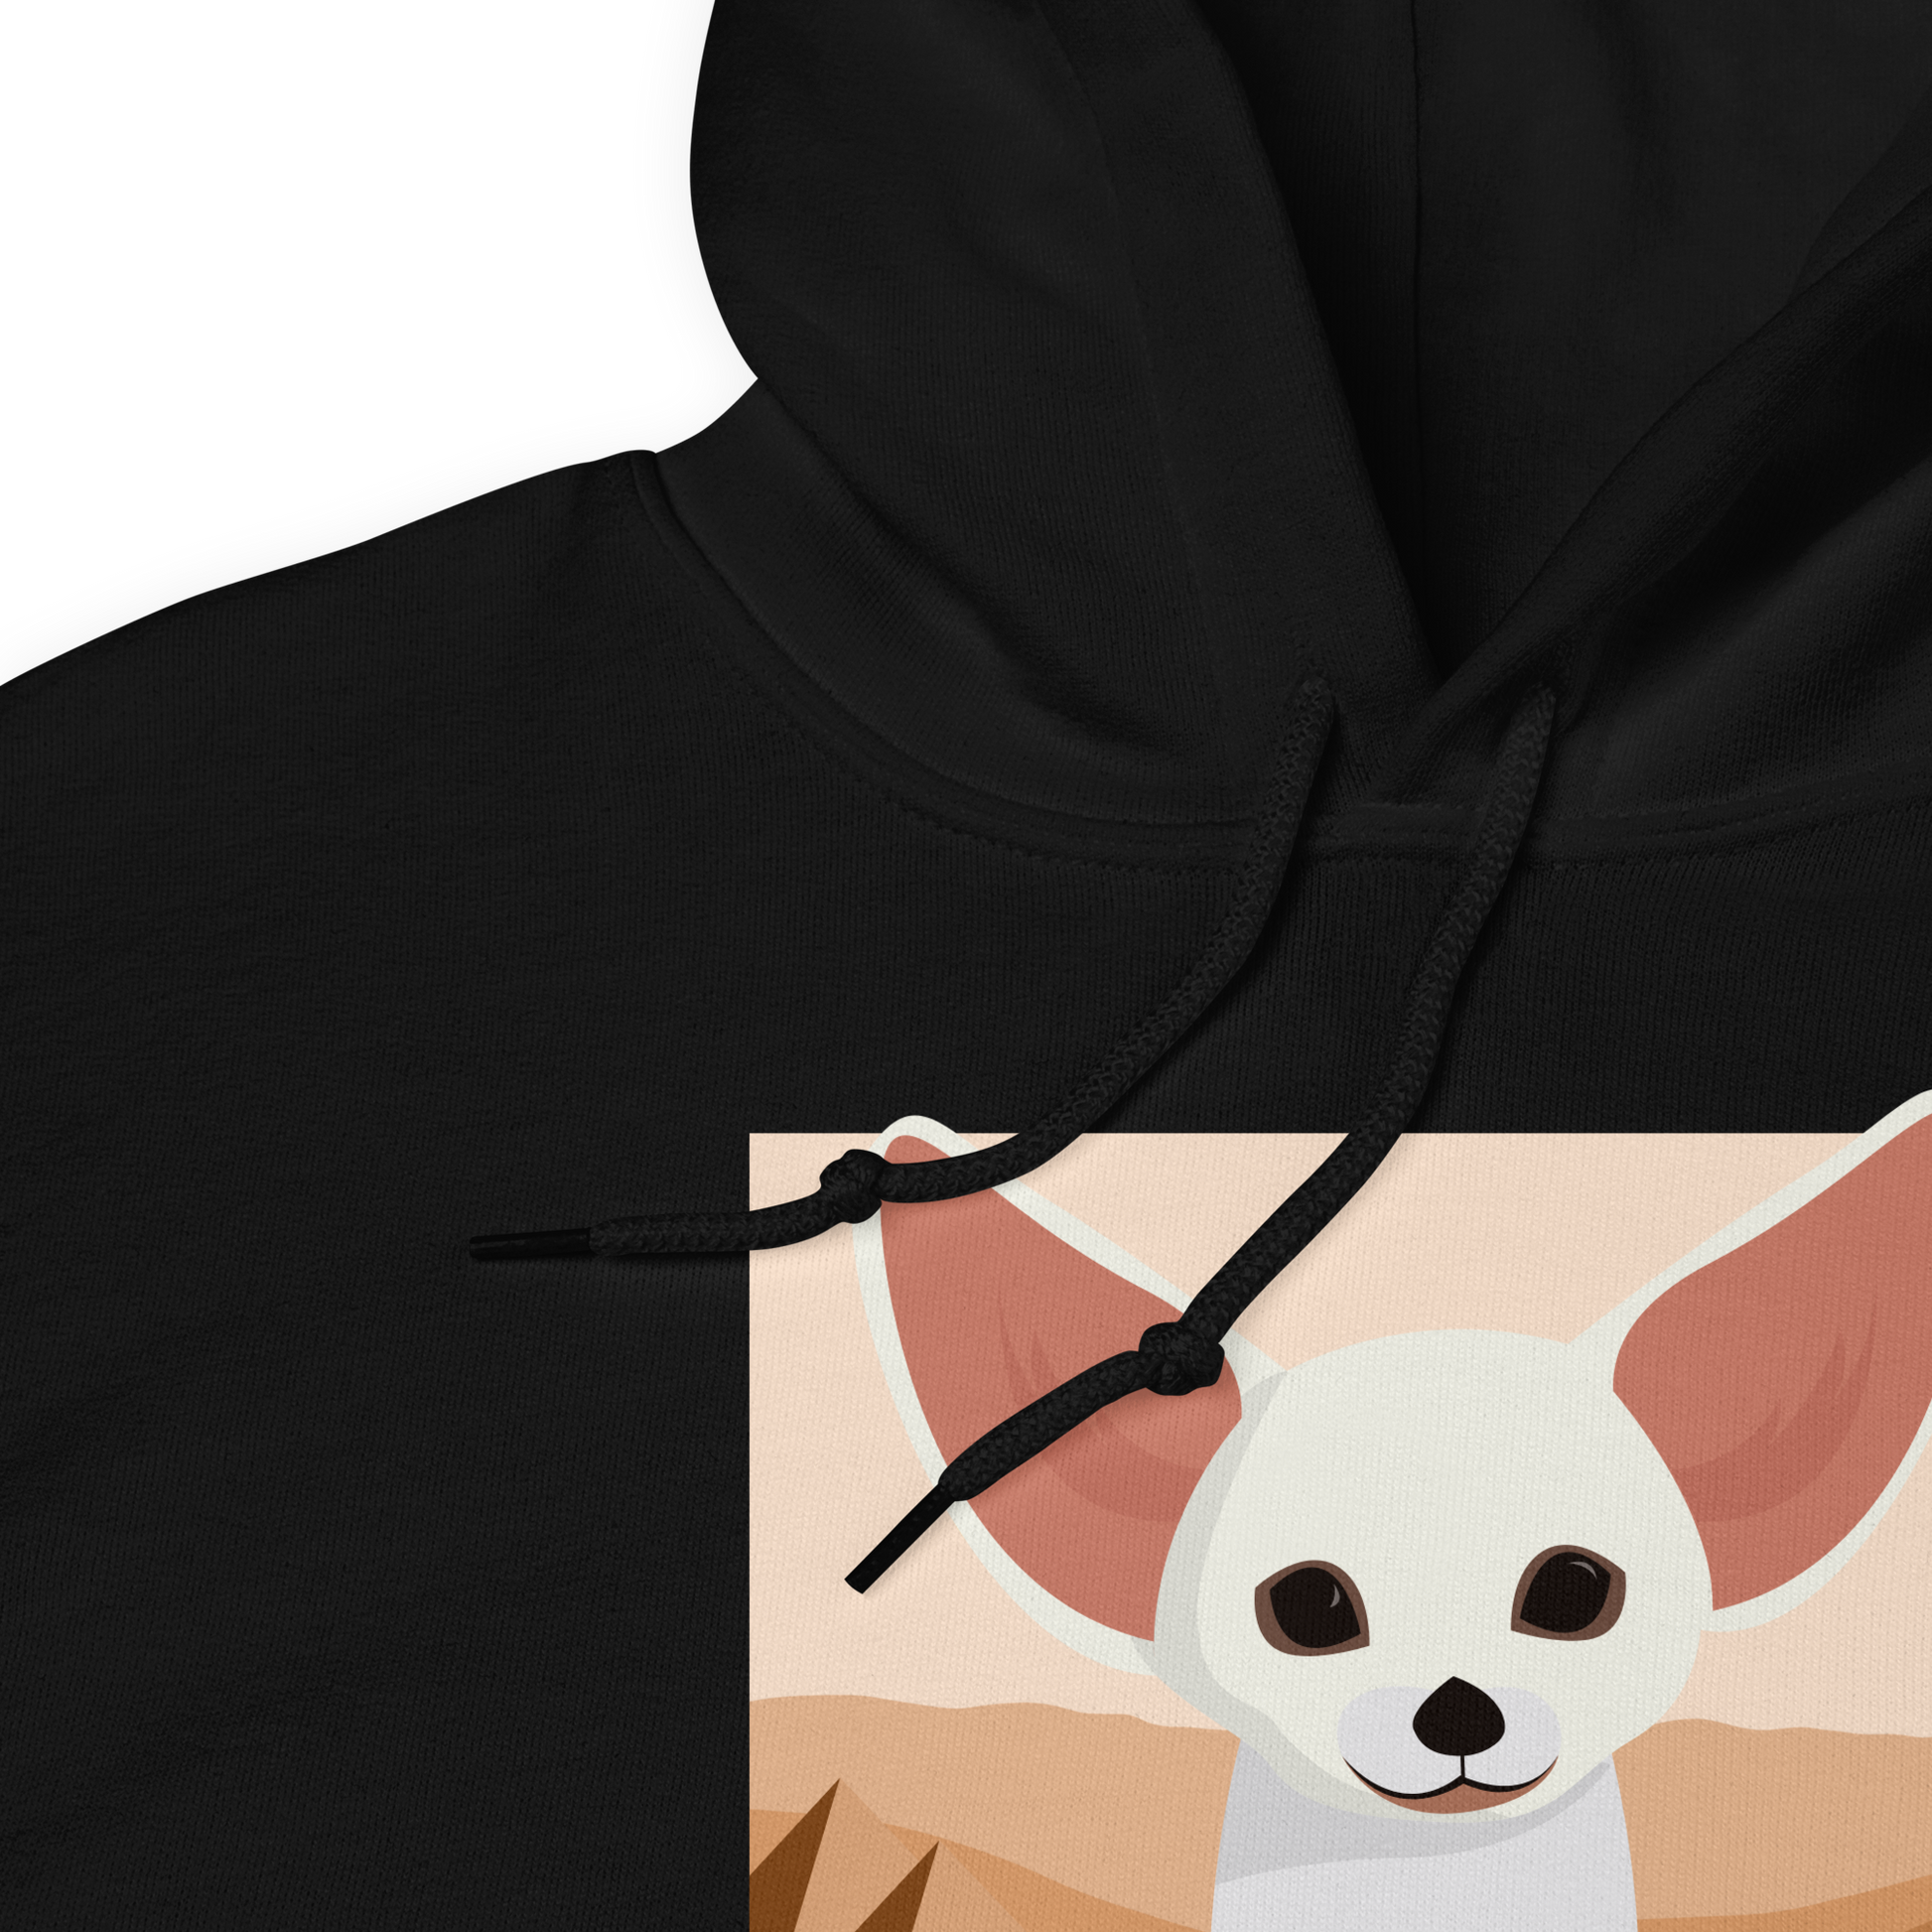 Front Details of a Black Fennec Fox Hoodie featuring an adorable Dessert Addict graphic on the chest - Funny Graphic Fennec Fox Hoodies - Boozy Fox